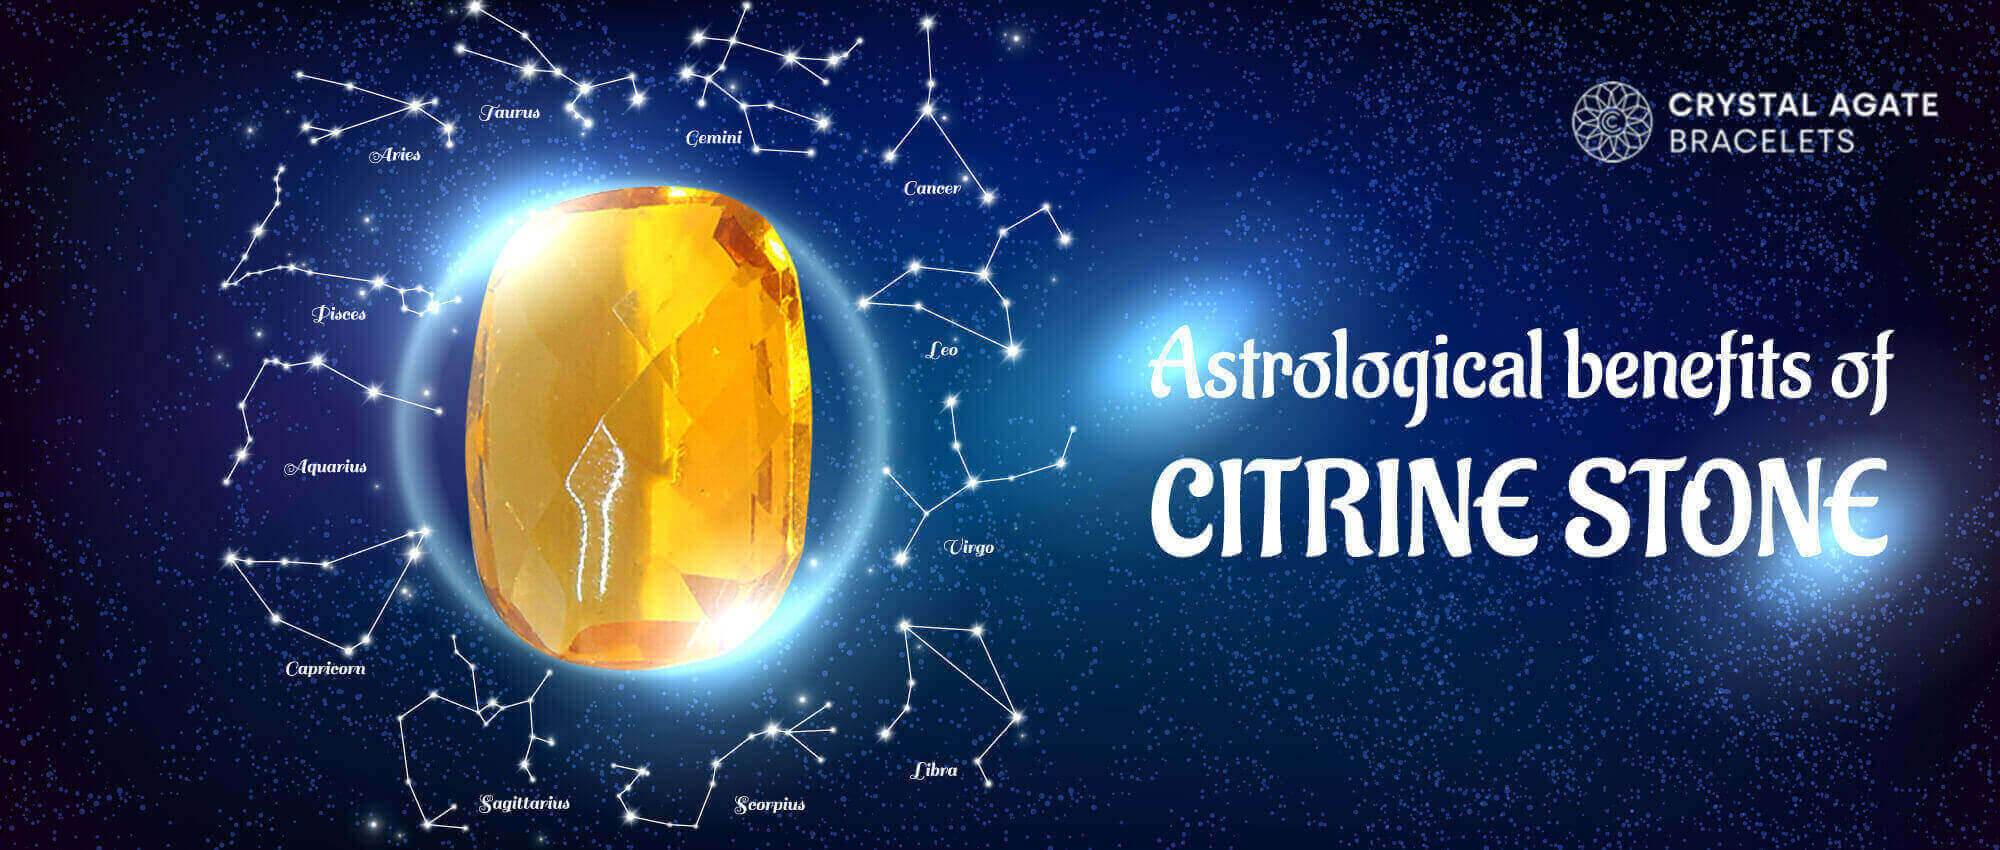 Citrine Crystal Healing Properties, Benefits and Citrine Products Uses